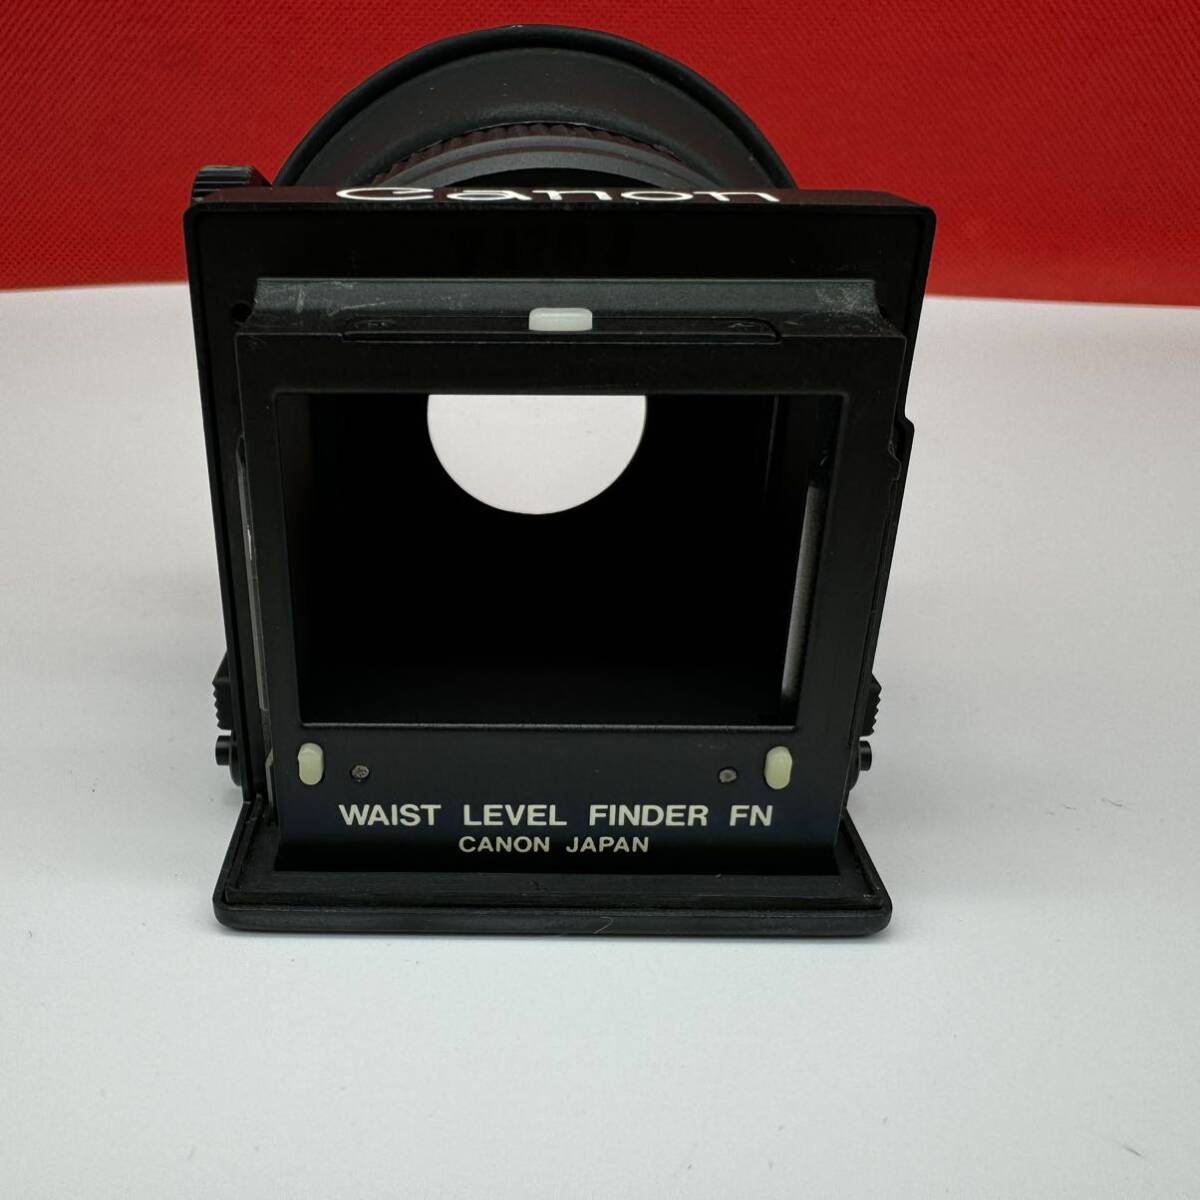 ^ Canon WAIST LEVEL FINDER FN waist Revell finder accessory Canon 